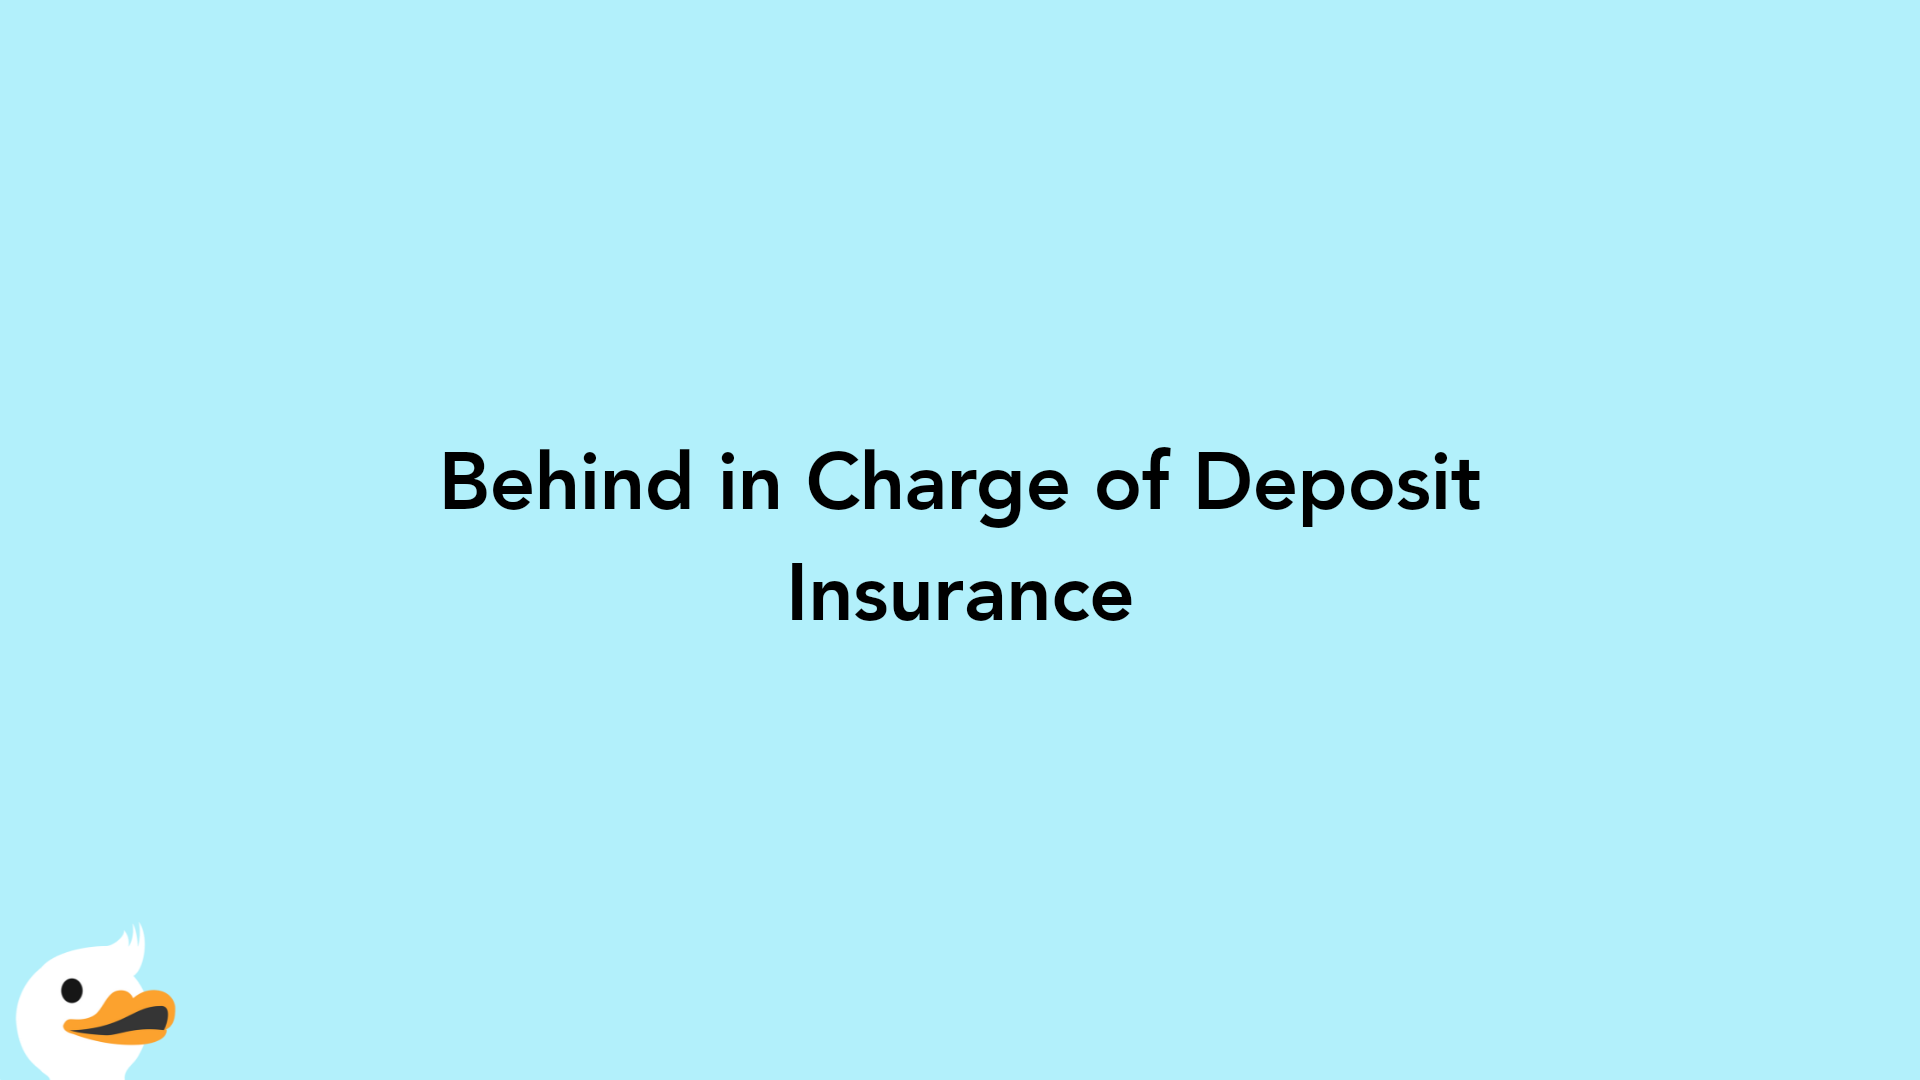 Behind in Charge of Deposit Insurance